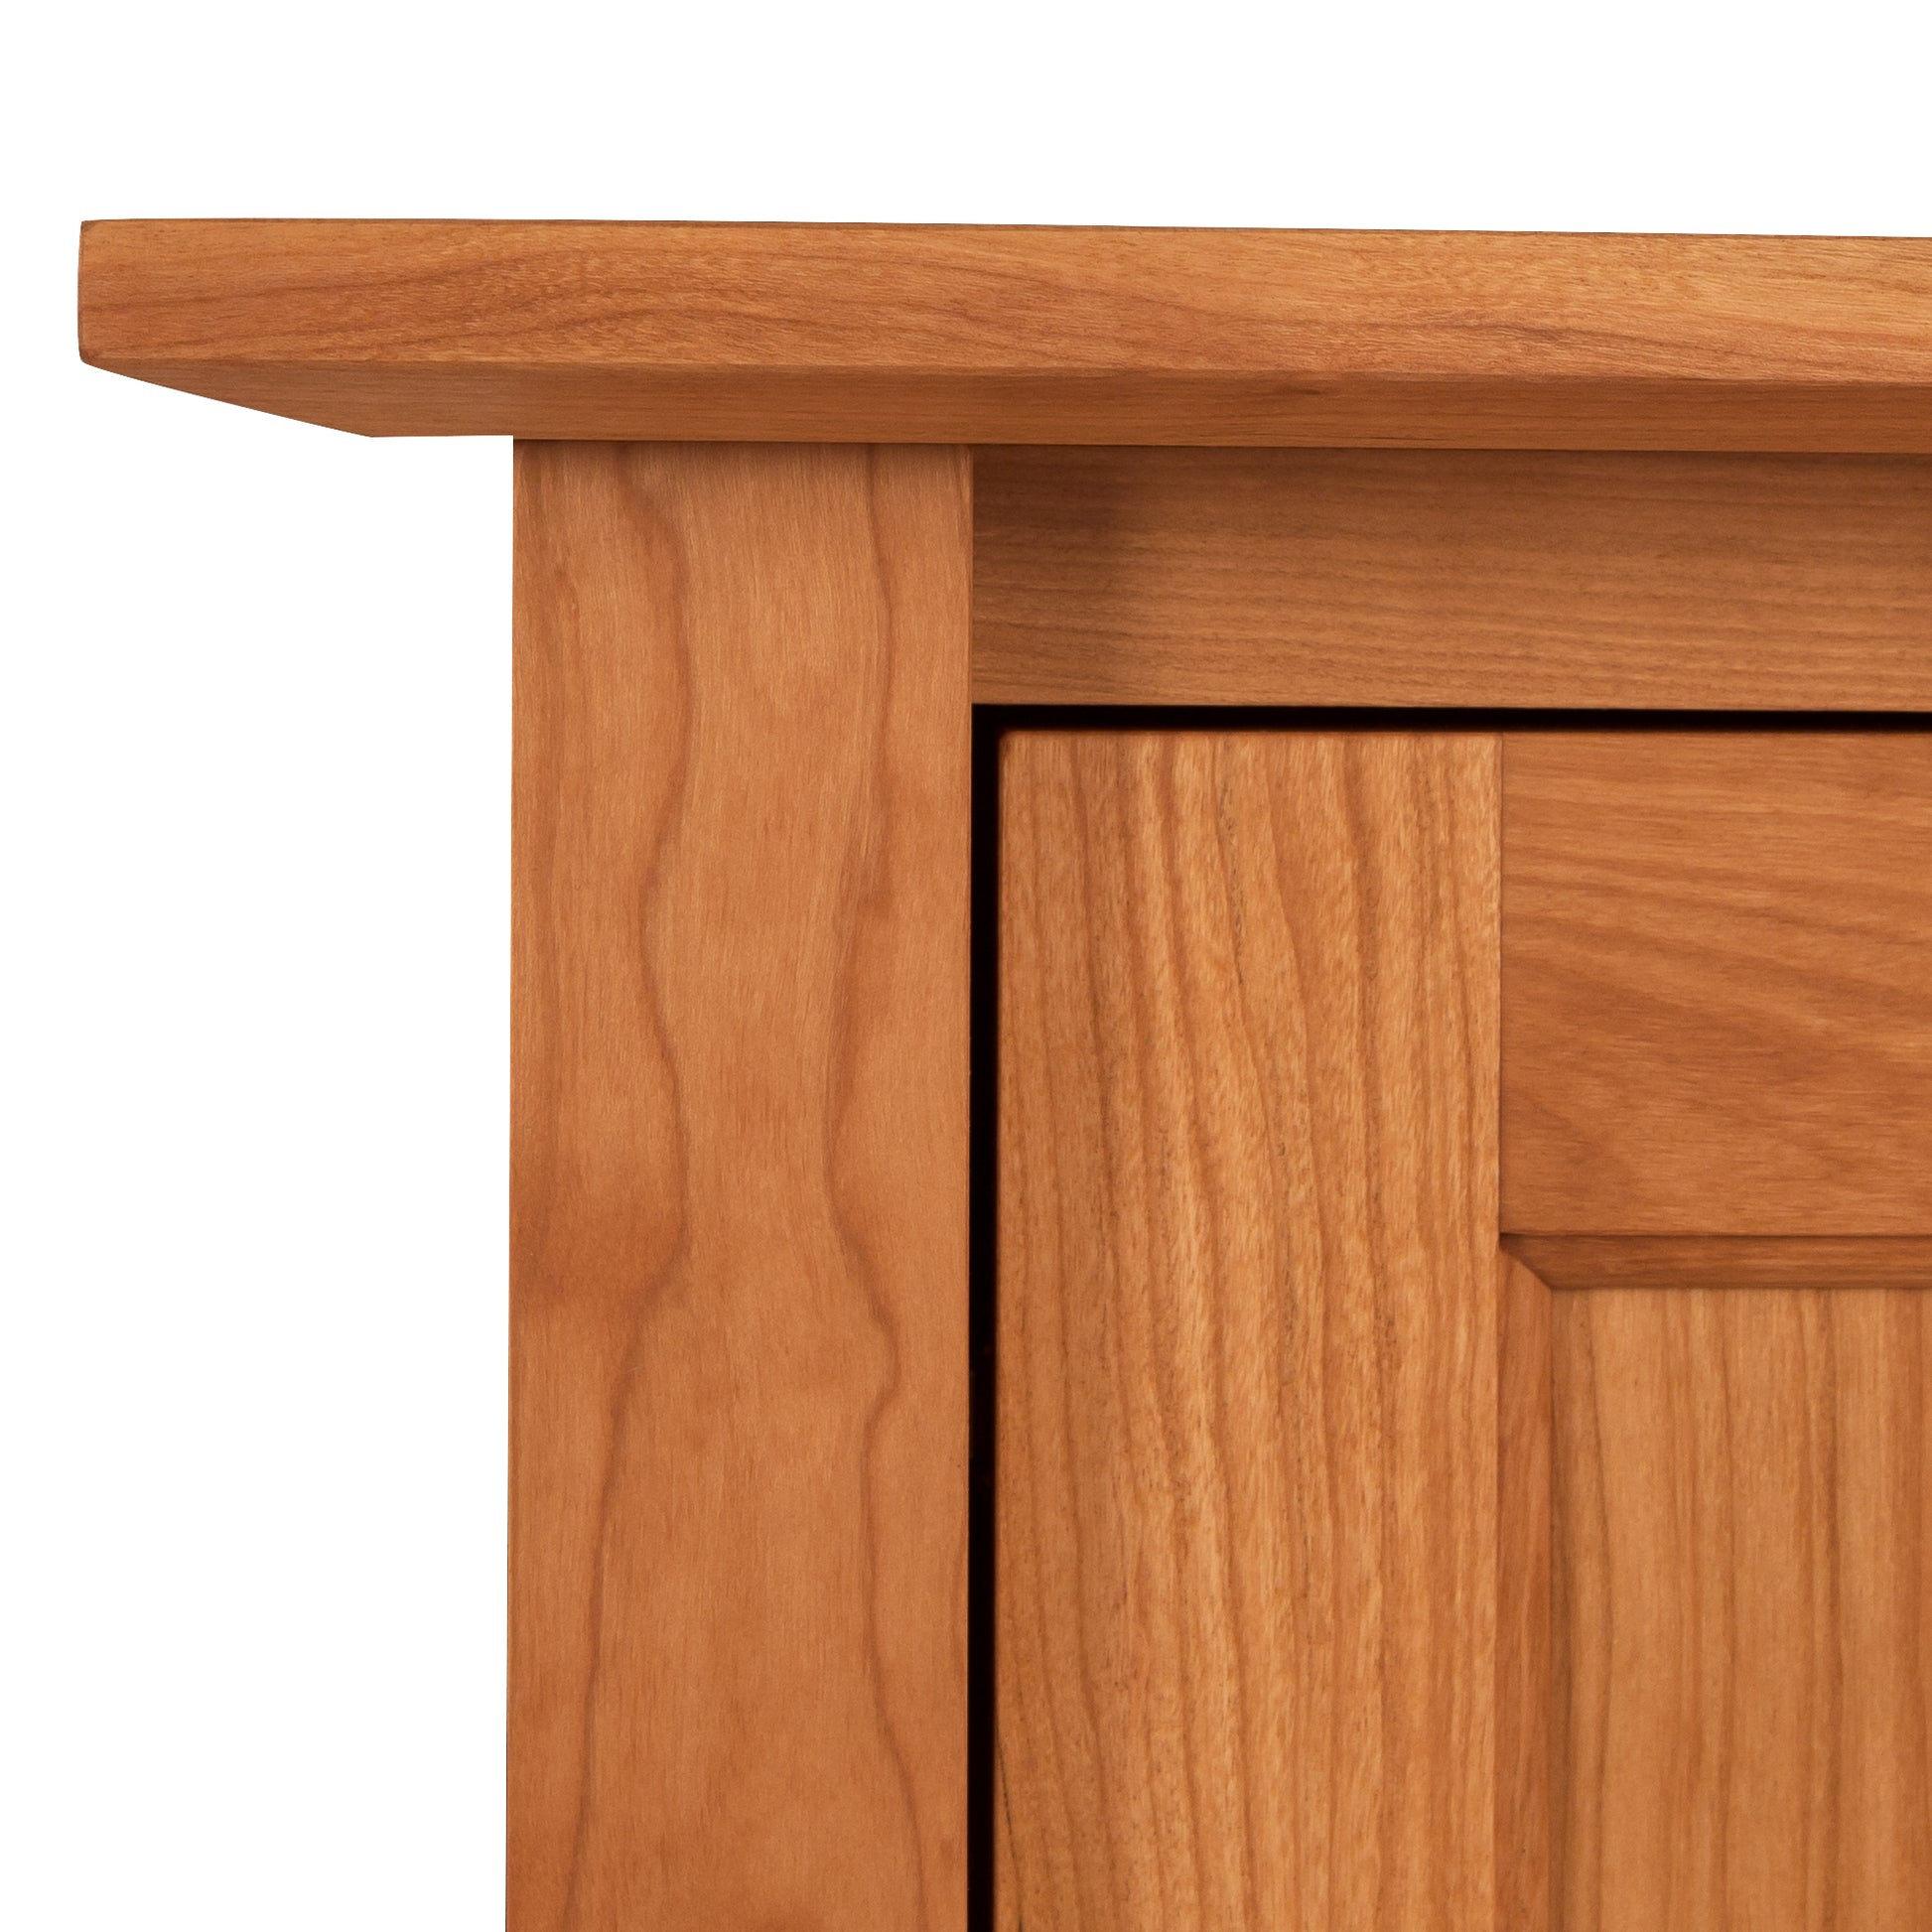 Close-up of an American Shaker 67" TV Stand by Maple Corner Woodworks, highlighting the grain pattern and construction details of the wood panels and edges.